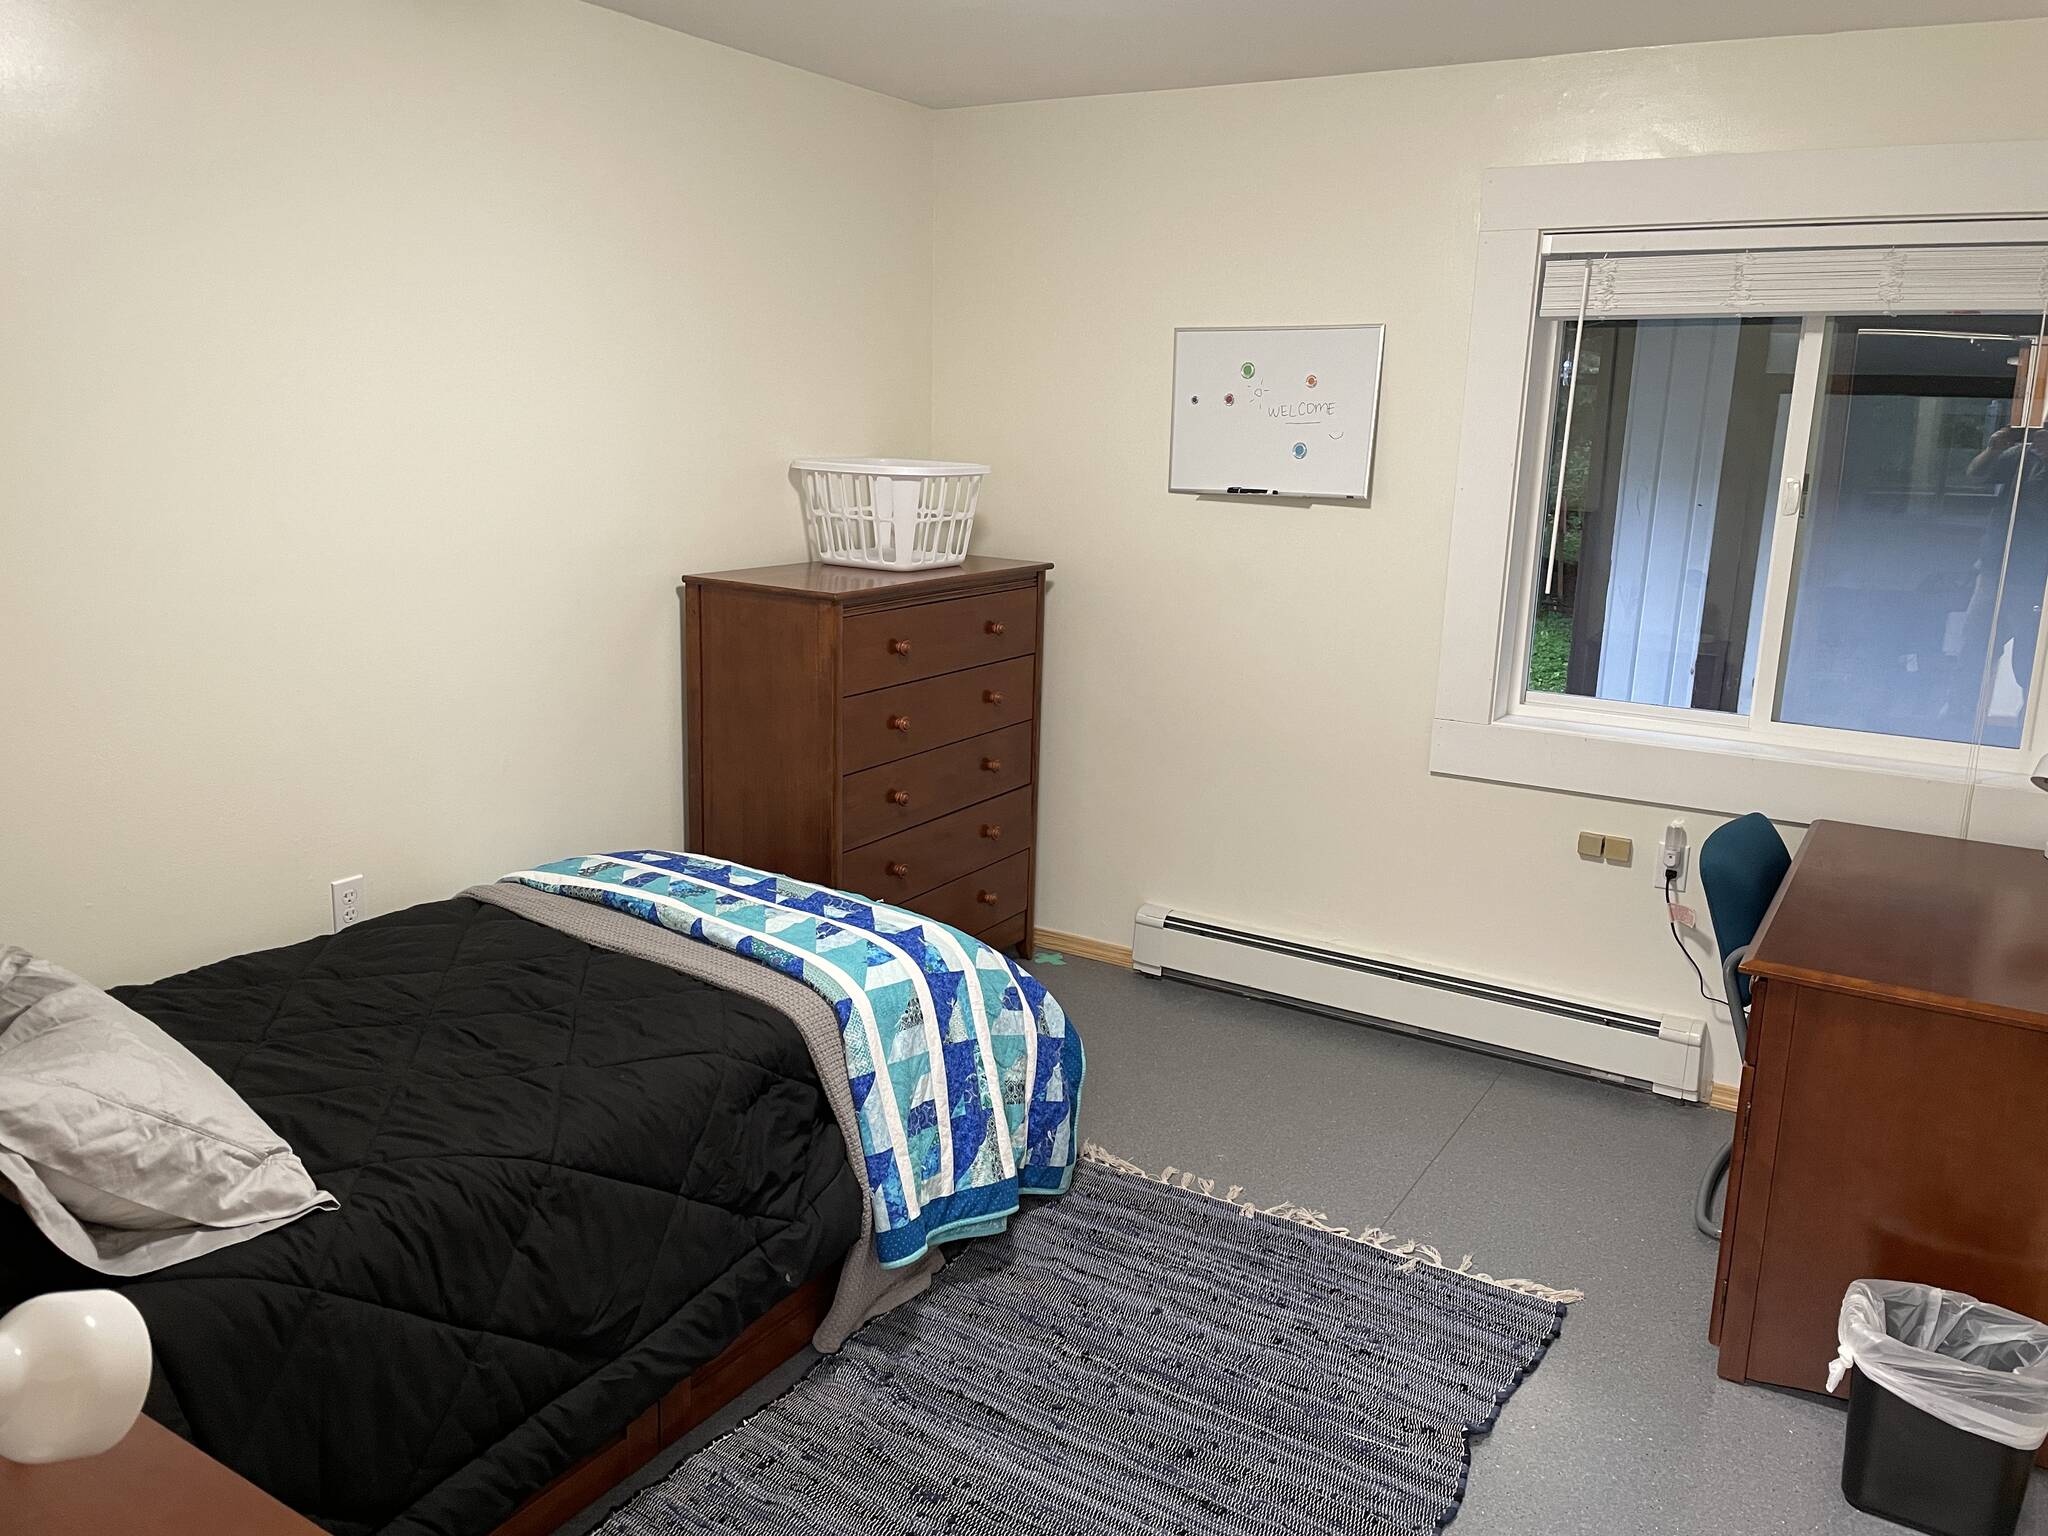 Shéiyi X̱aat Hít, or Spruce Root House, Juneau’s new youth shelter formally opened this September. There’s housing for six kids aged 10-17 in the youth shelter. (Michael S. Lockett / Juneau Empire)